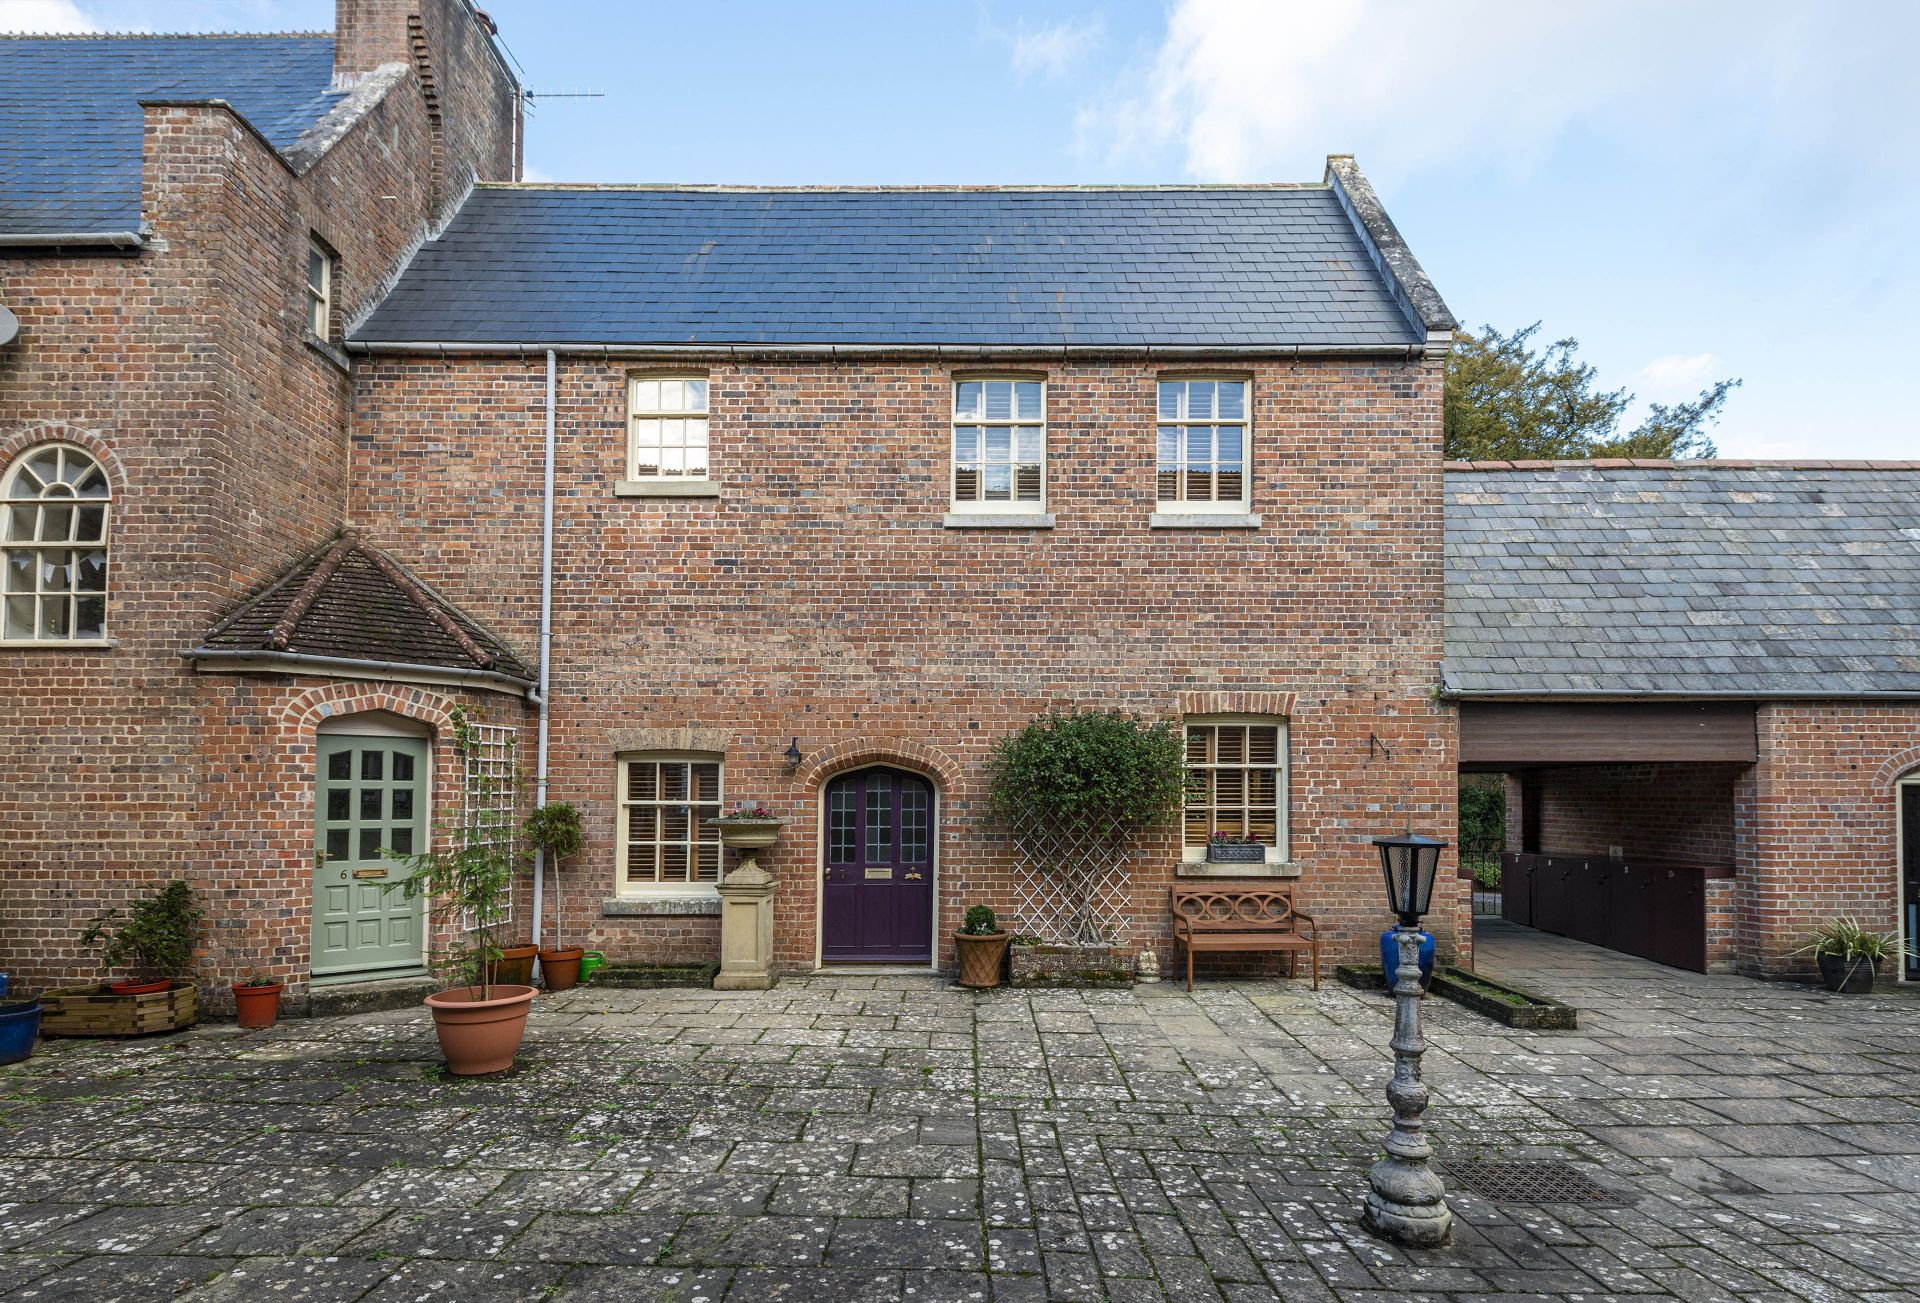 7 The Courtyard a holiday cottage rental for 4 in Dorchester and surrounding villages, 